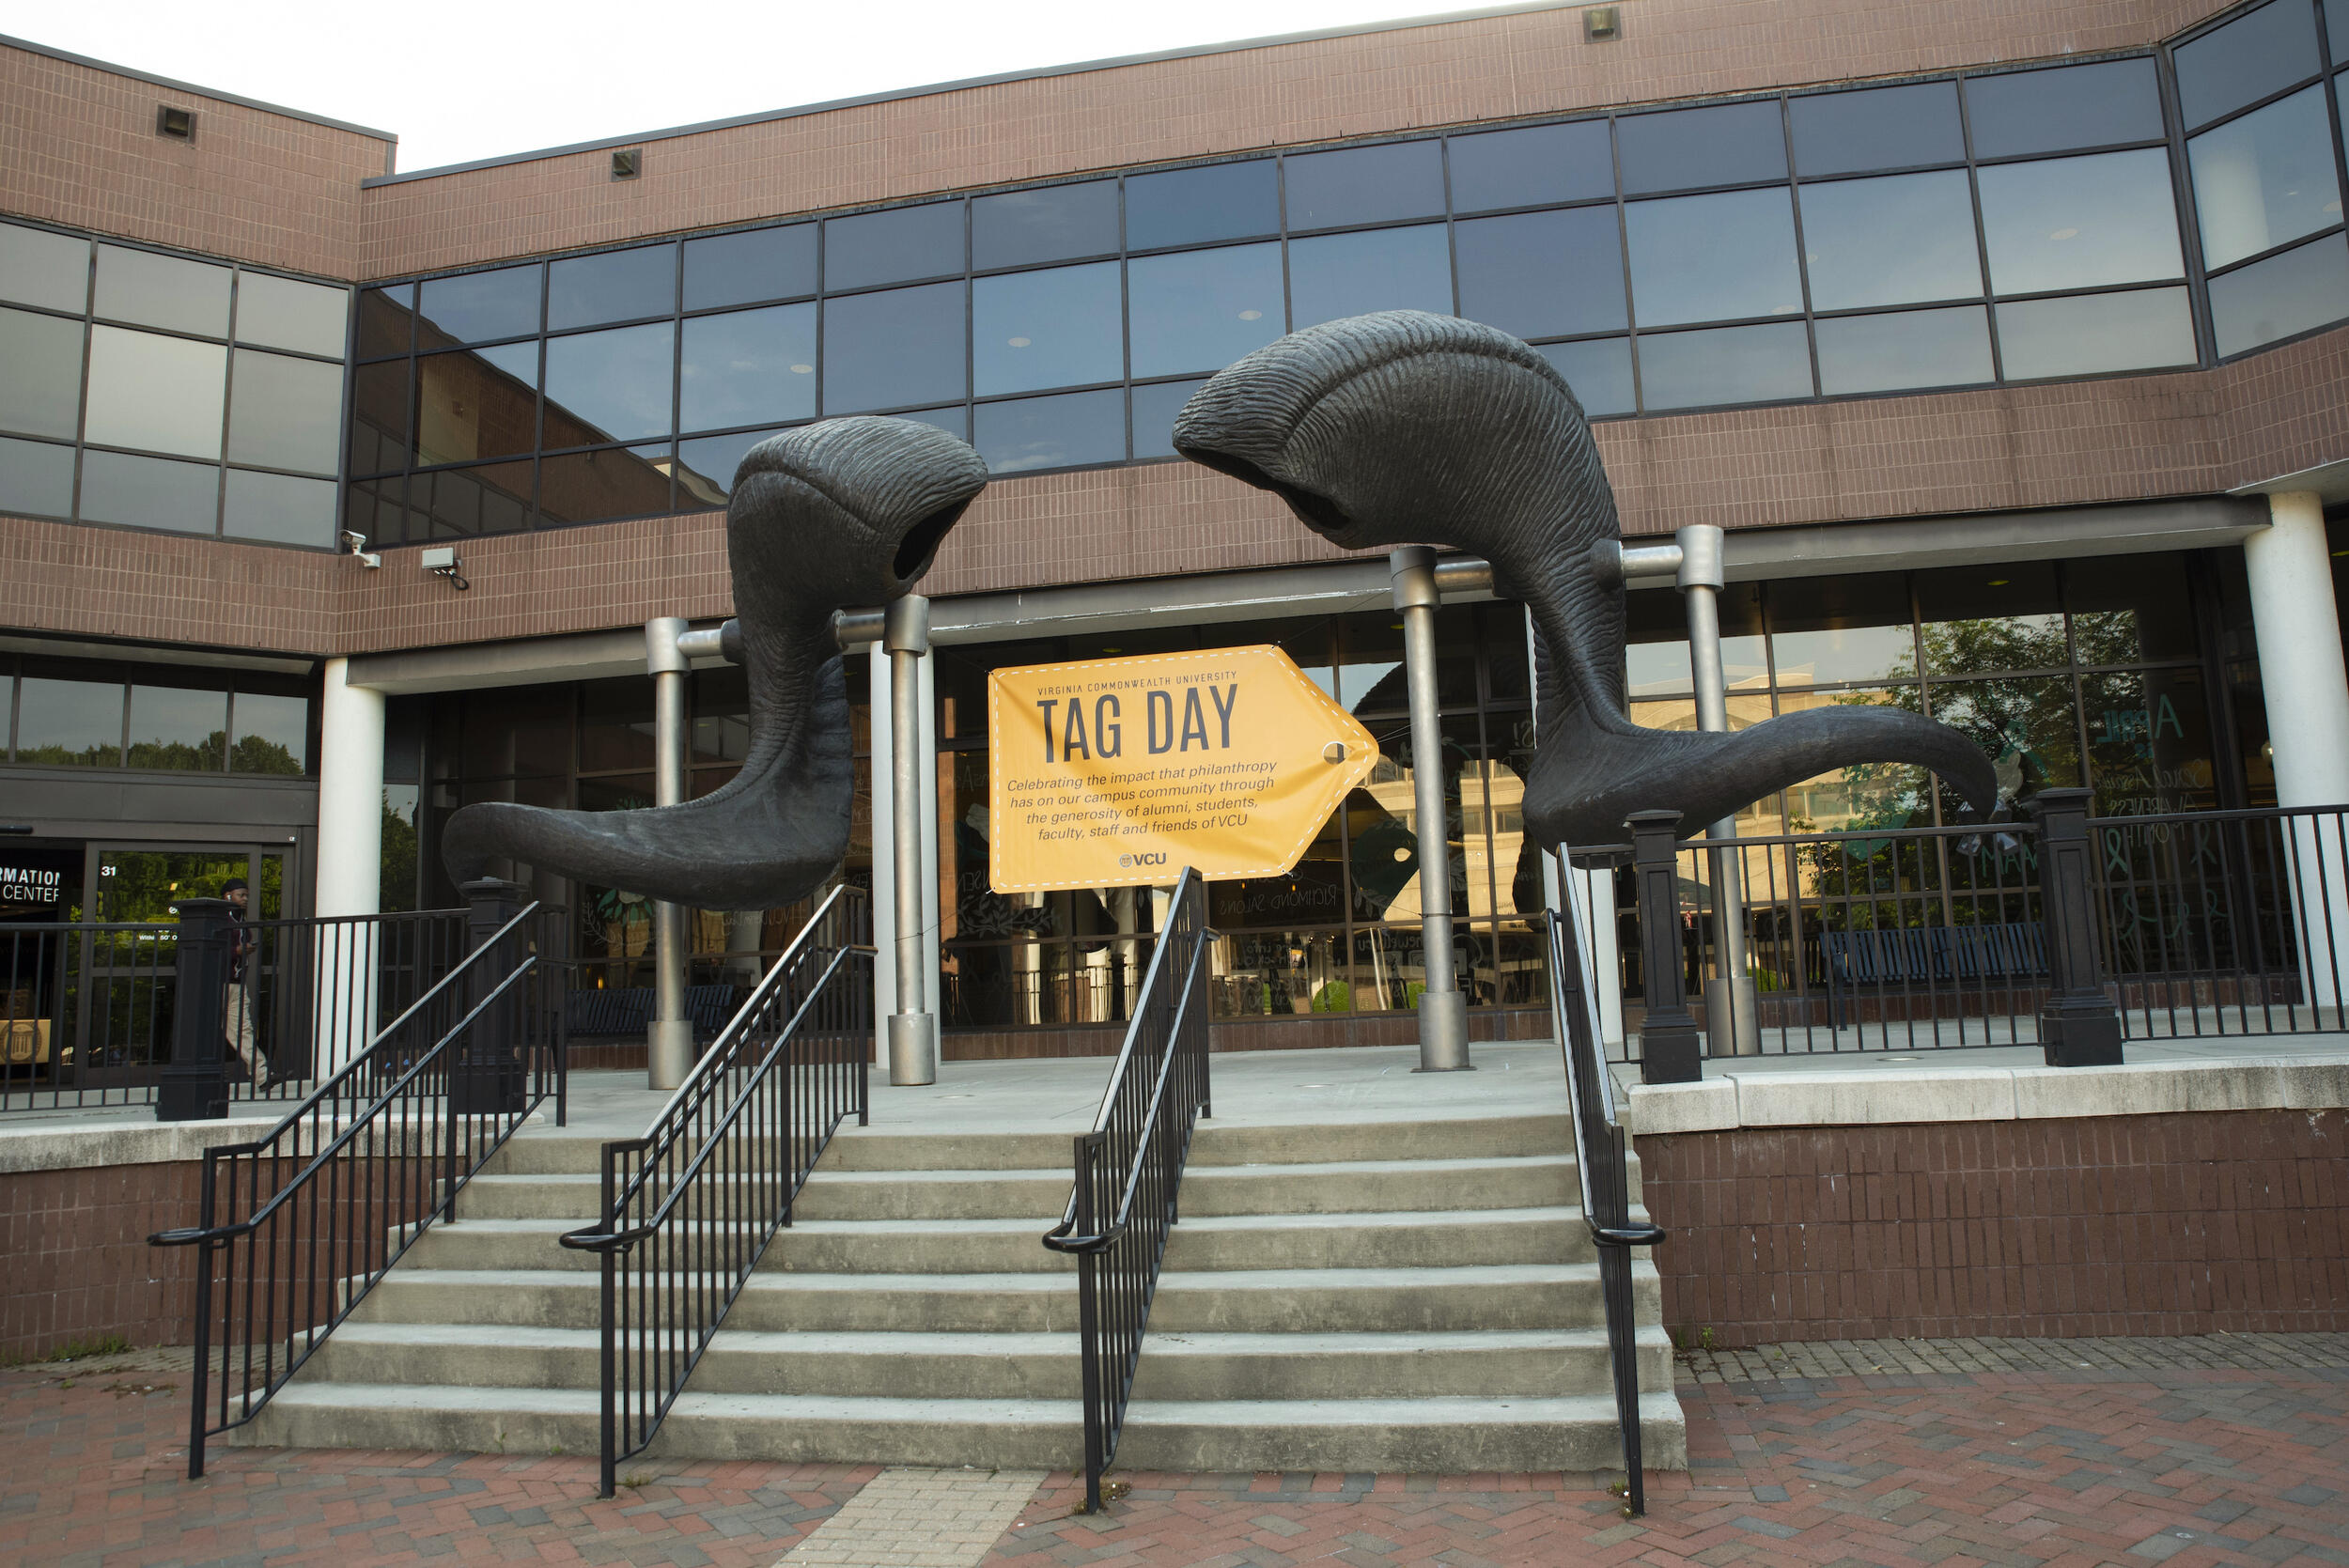 A sign celebrating Tag Day under the ram horn sculpture in front of the University Student Commons building.